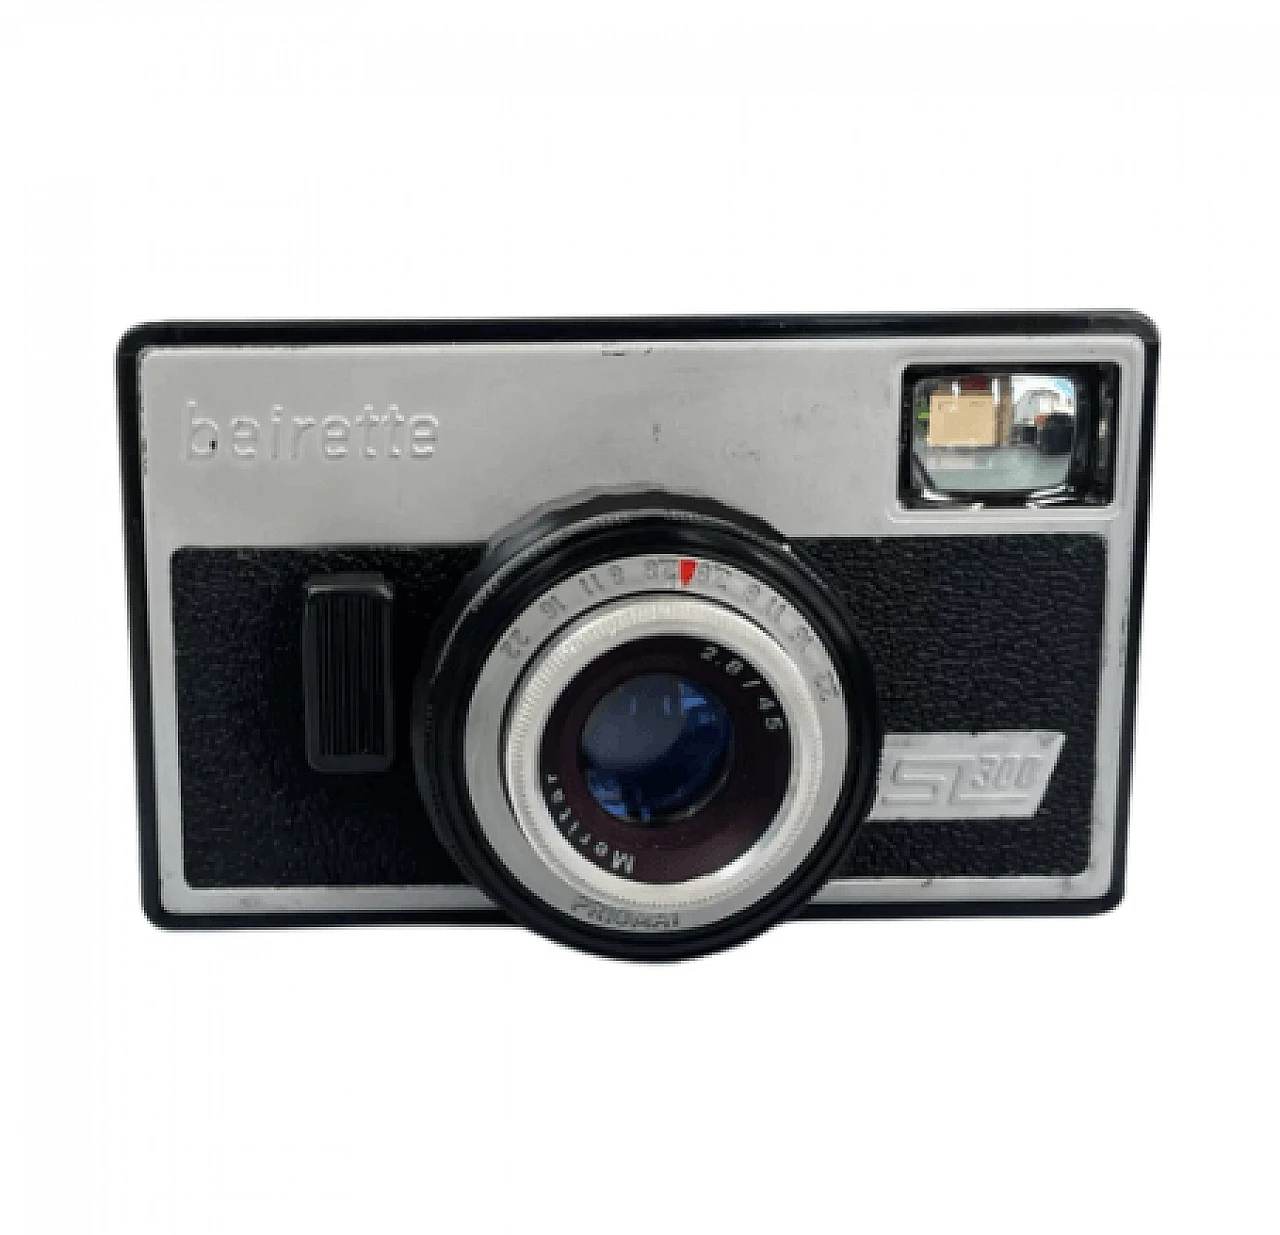 Beirette Electric SL300 analog camera with case, 1970s 10